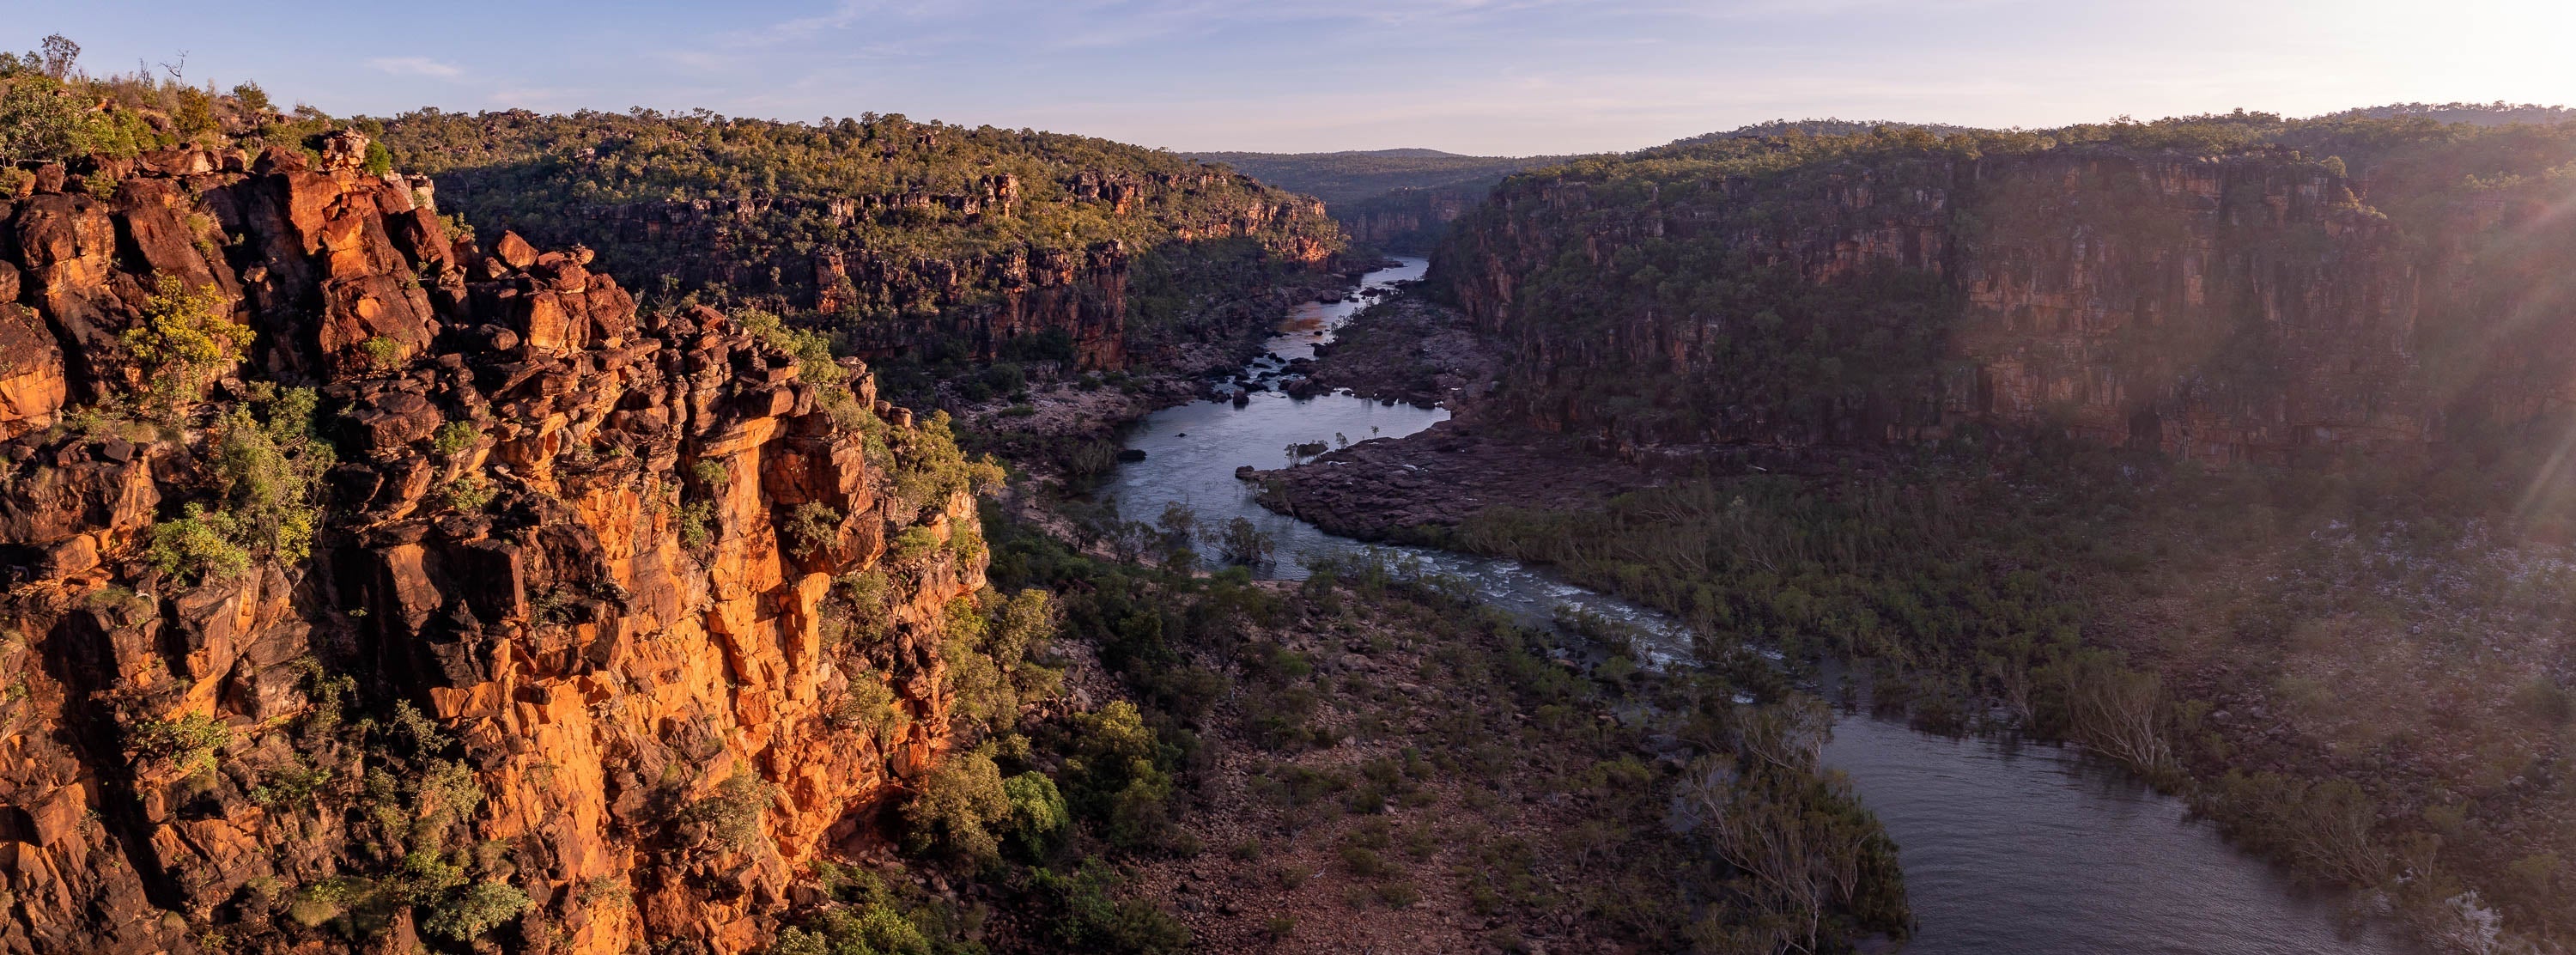 Lower Mitchell Gorge, The Kimberley